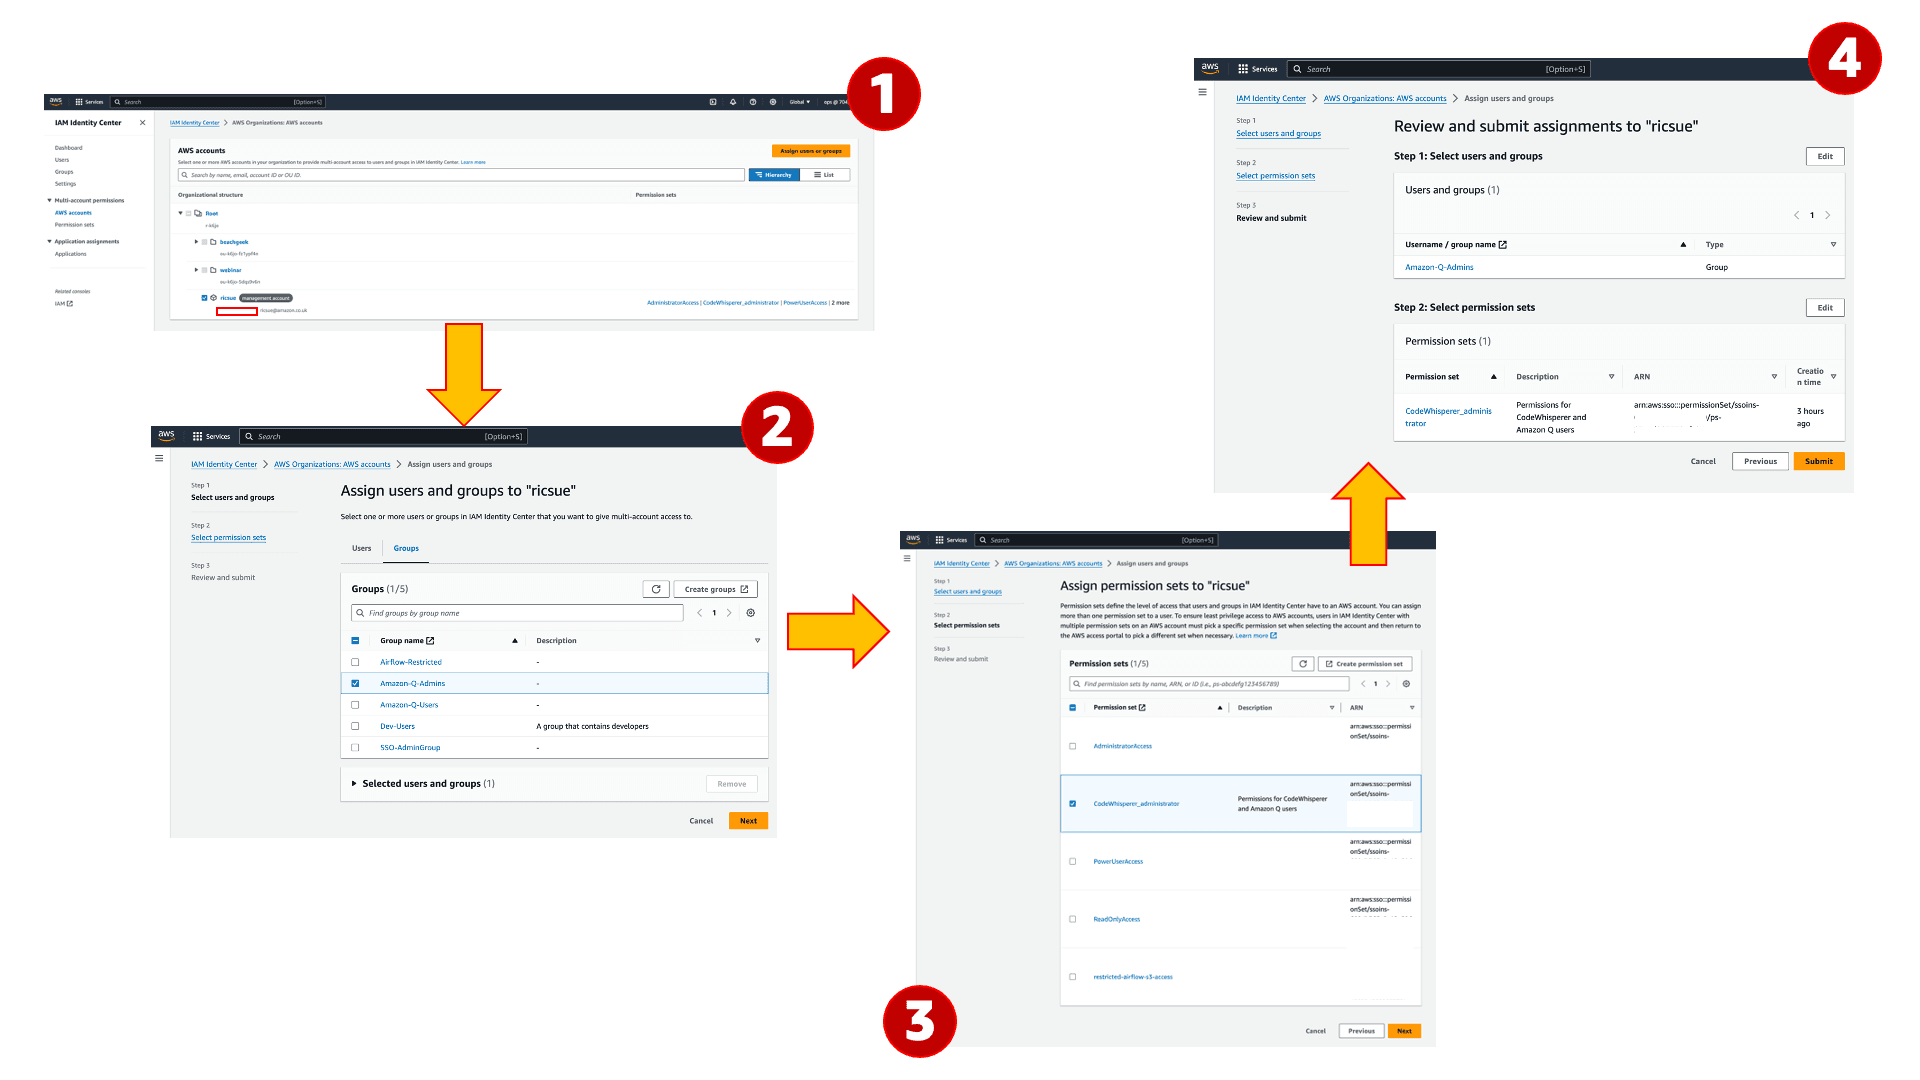 Assigning Permissions sets to your Amazon Q groups